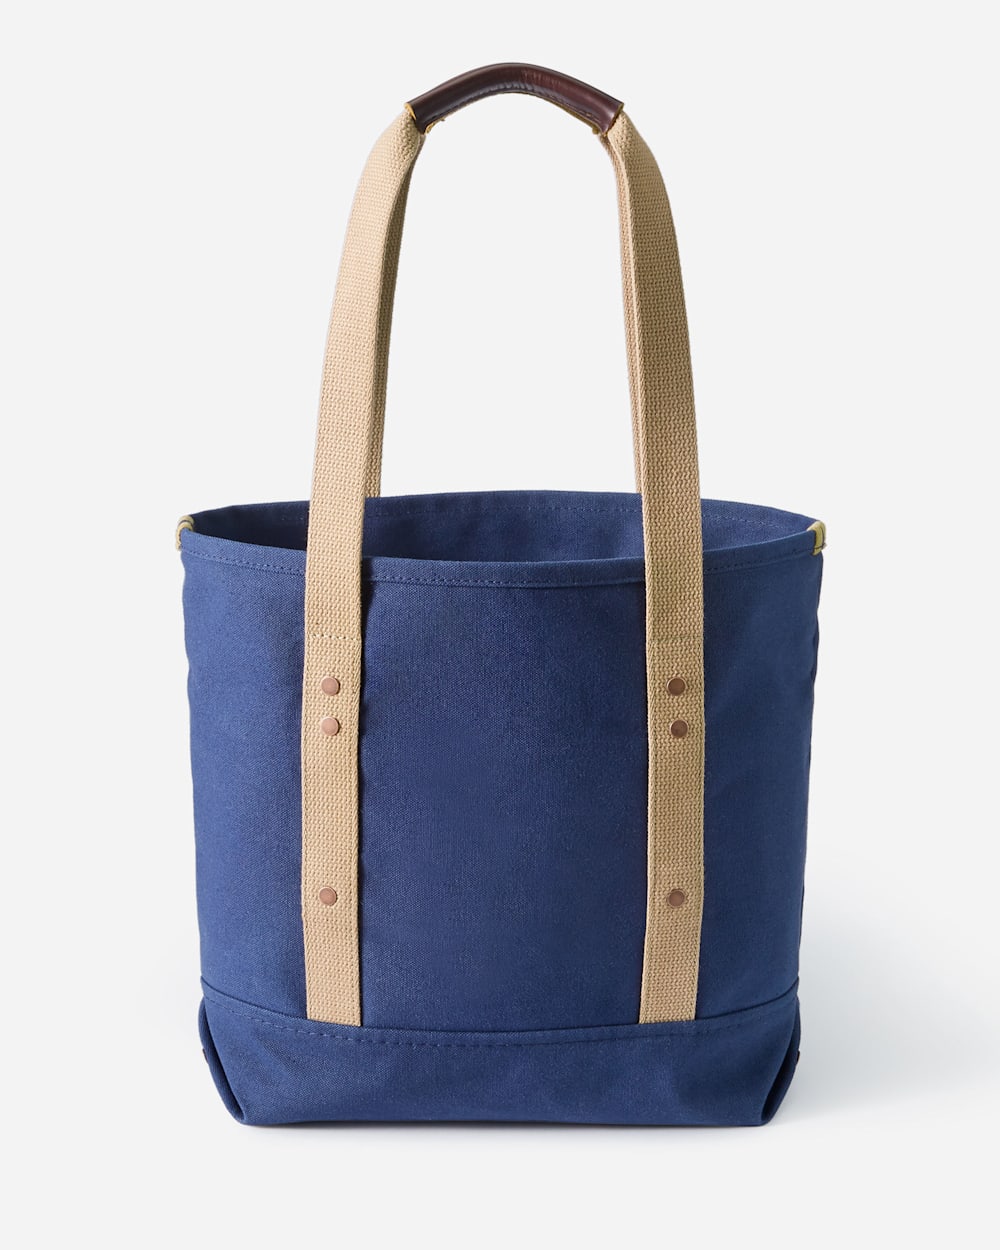 ALTERNATE VIEW OF CANVAS TOTE IN NAVY image number 2